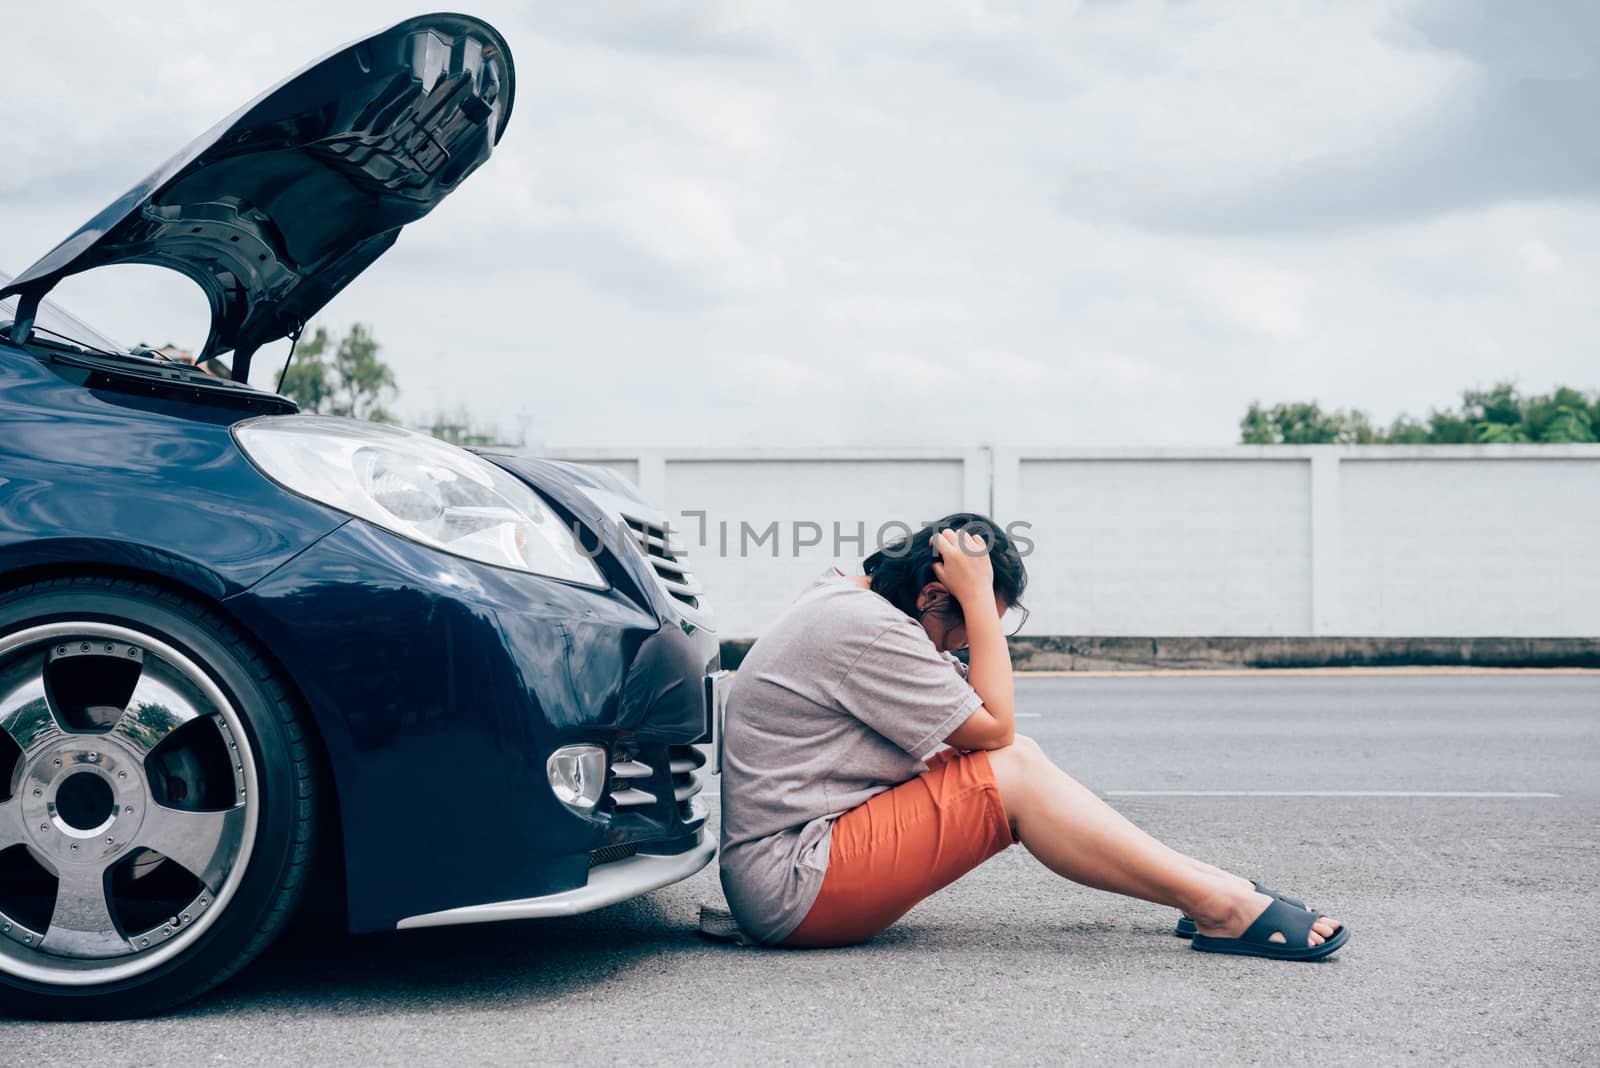 Asian woman 40s alone driver checking a car engine for fix and repair problem with unhappy and dismal between waiting a car mechanic from car engine problem at roadside